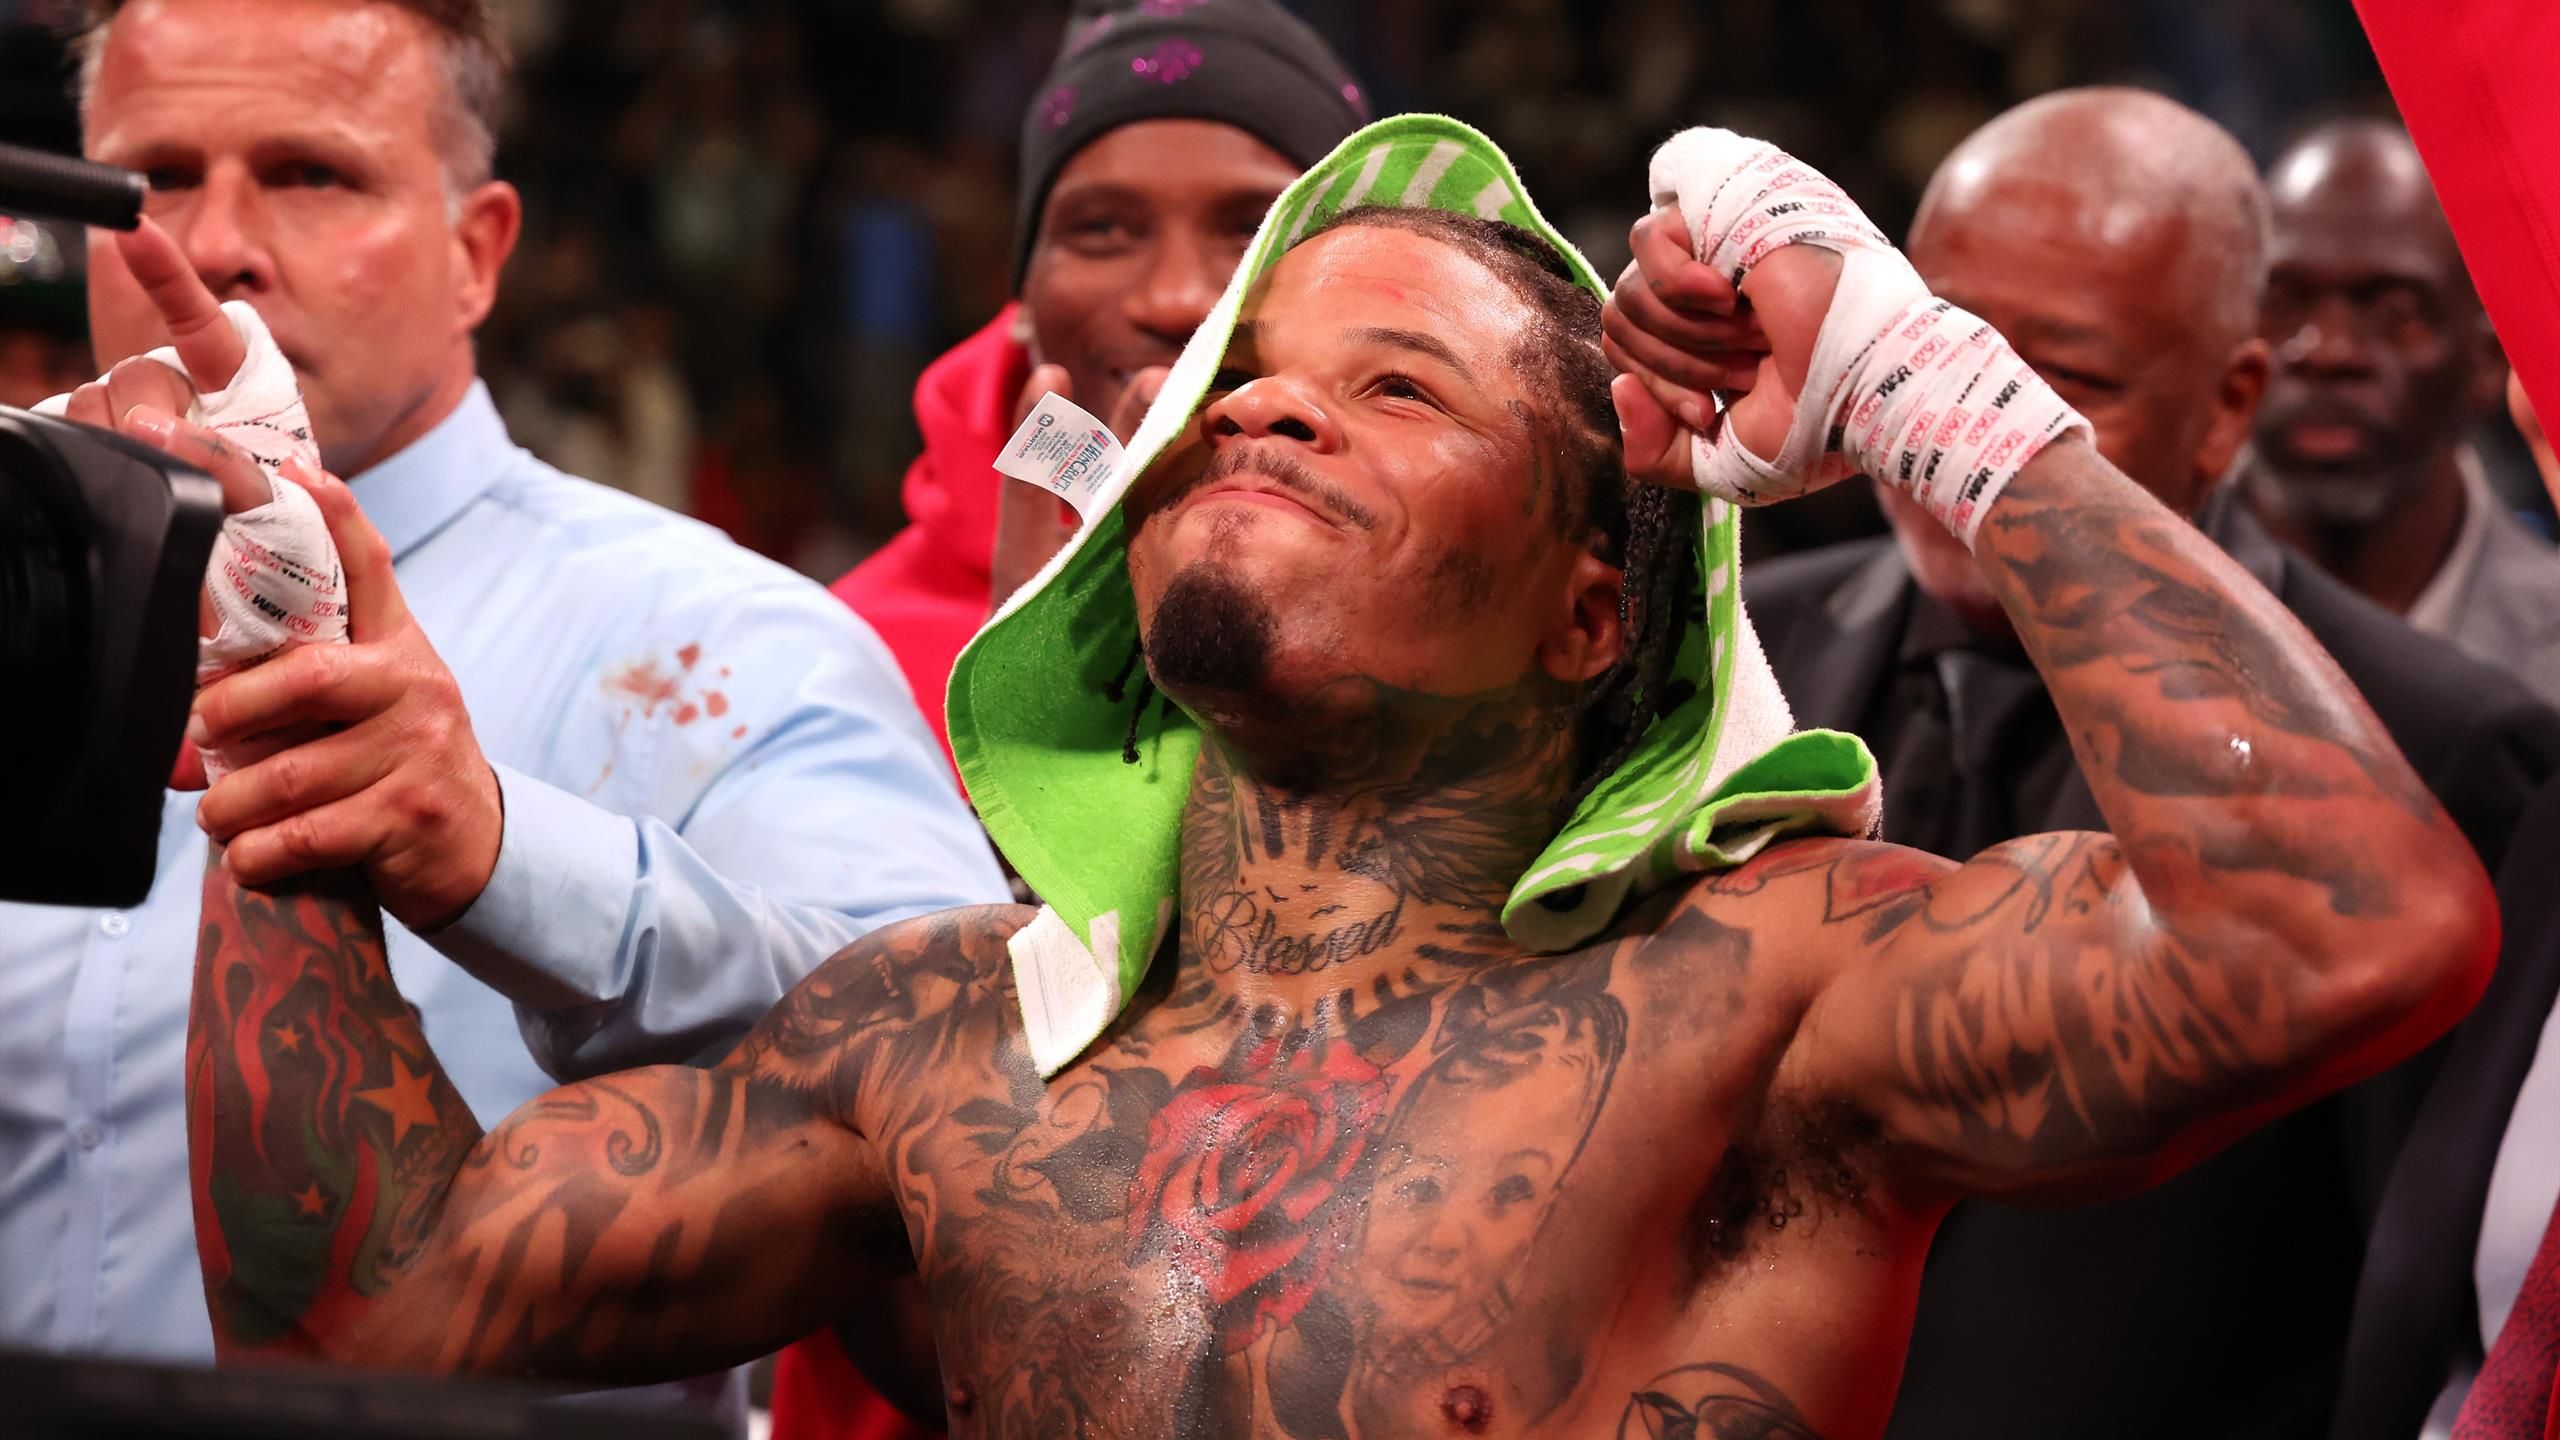 Gervonta Davis extends winning streak with seventh-round knockout win over Ryan Garcia - Im the face of boxing